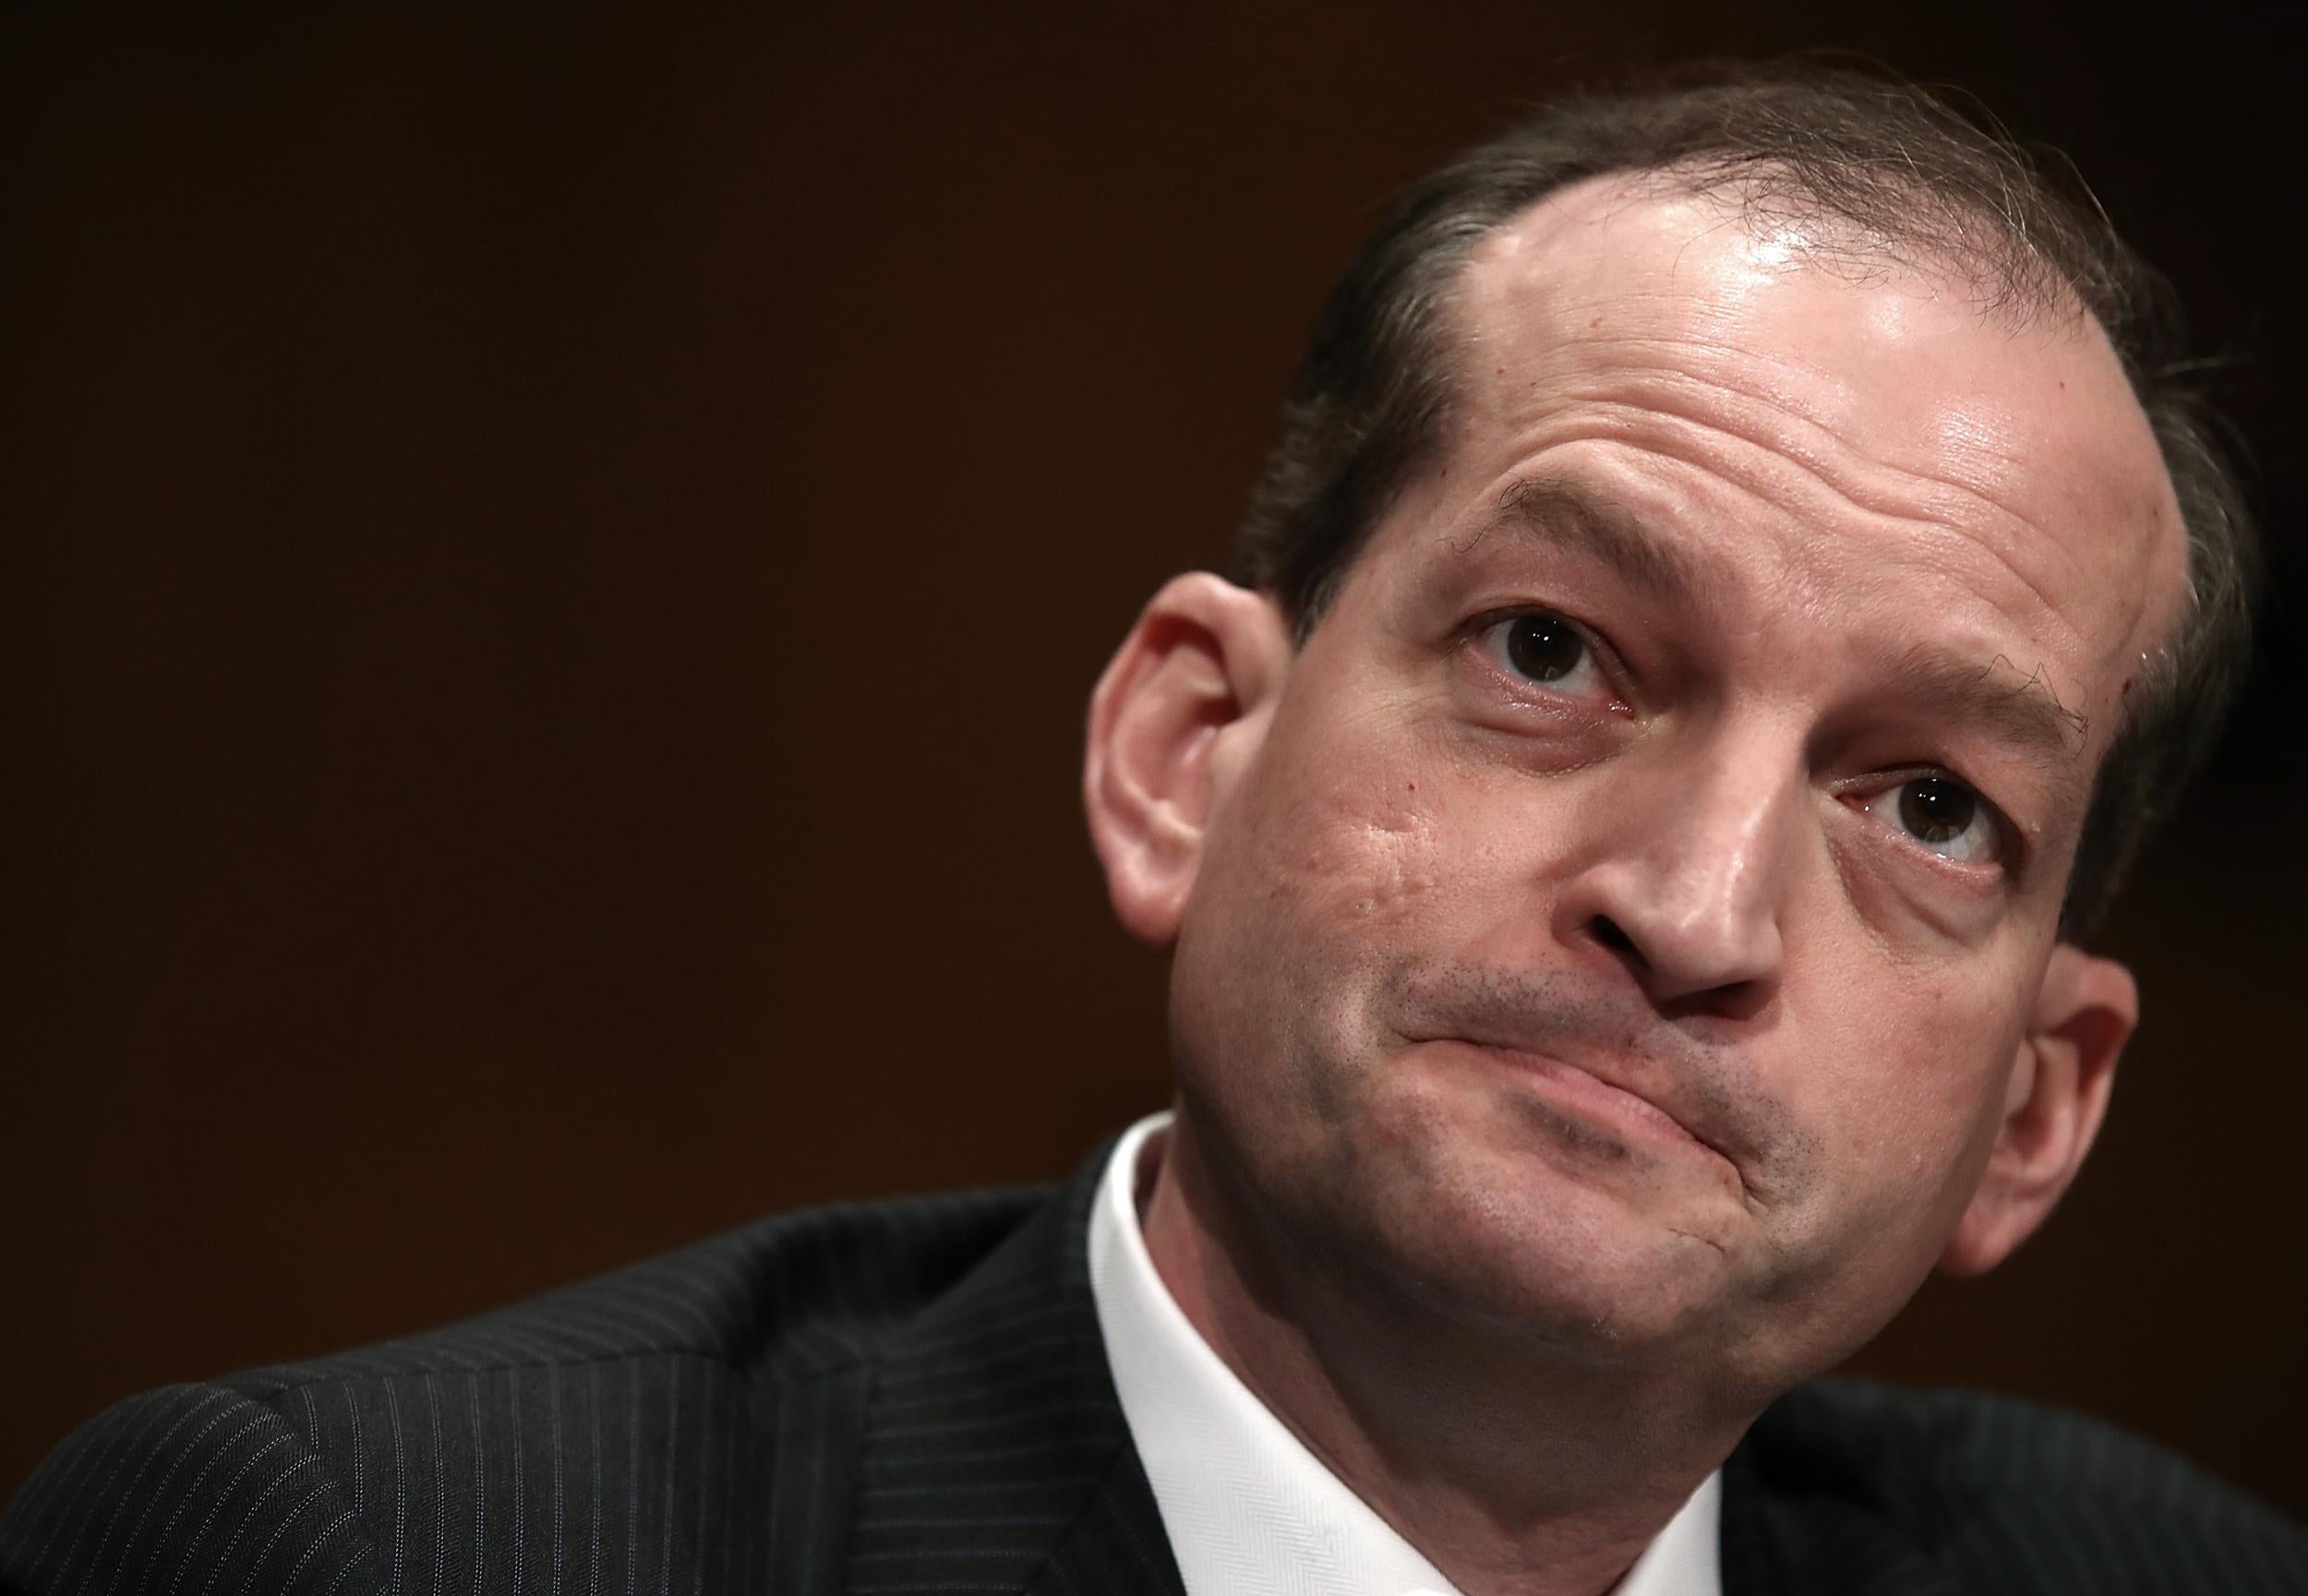 Alexander Acosta, now in line for a top job in Trump's cabinet, faces questions over the light punishment he handed to a sex offender when he was Miami US attorney